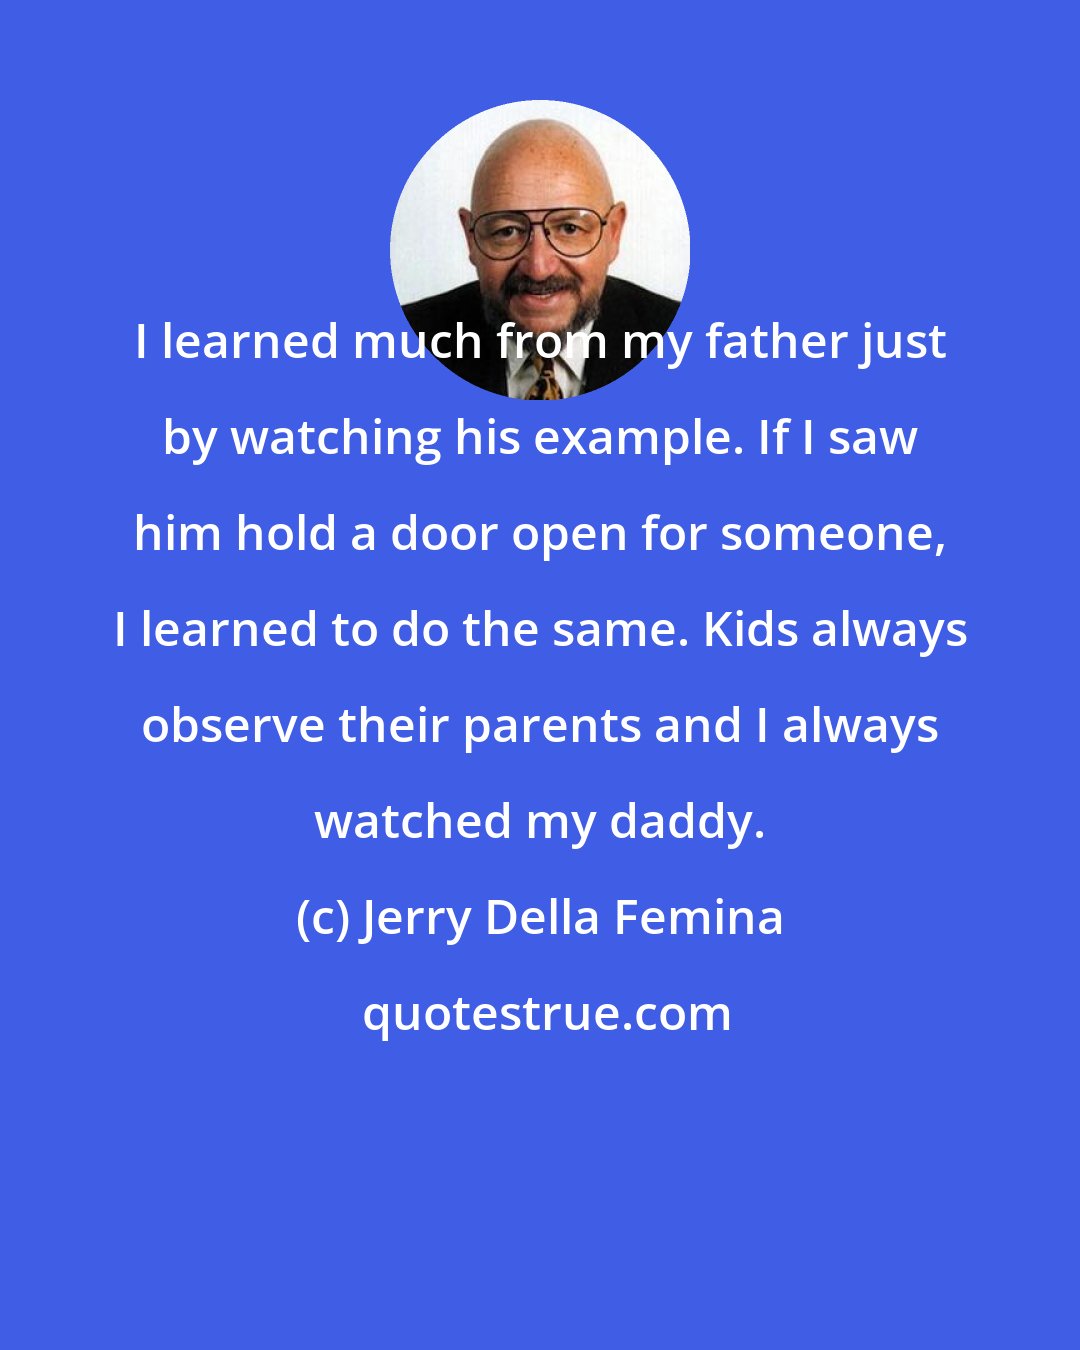 Jerry Della Femina: I learned much from my father just by watching his example. If I saw him hold a door open for someone, I learned to do the same. Kids always observe their parents and I always watched my daddy.